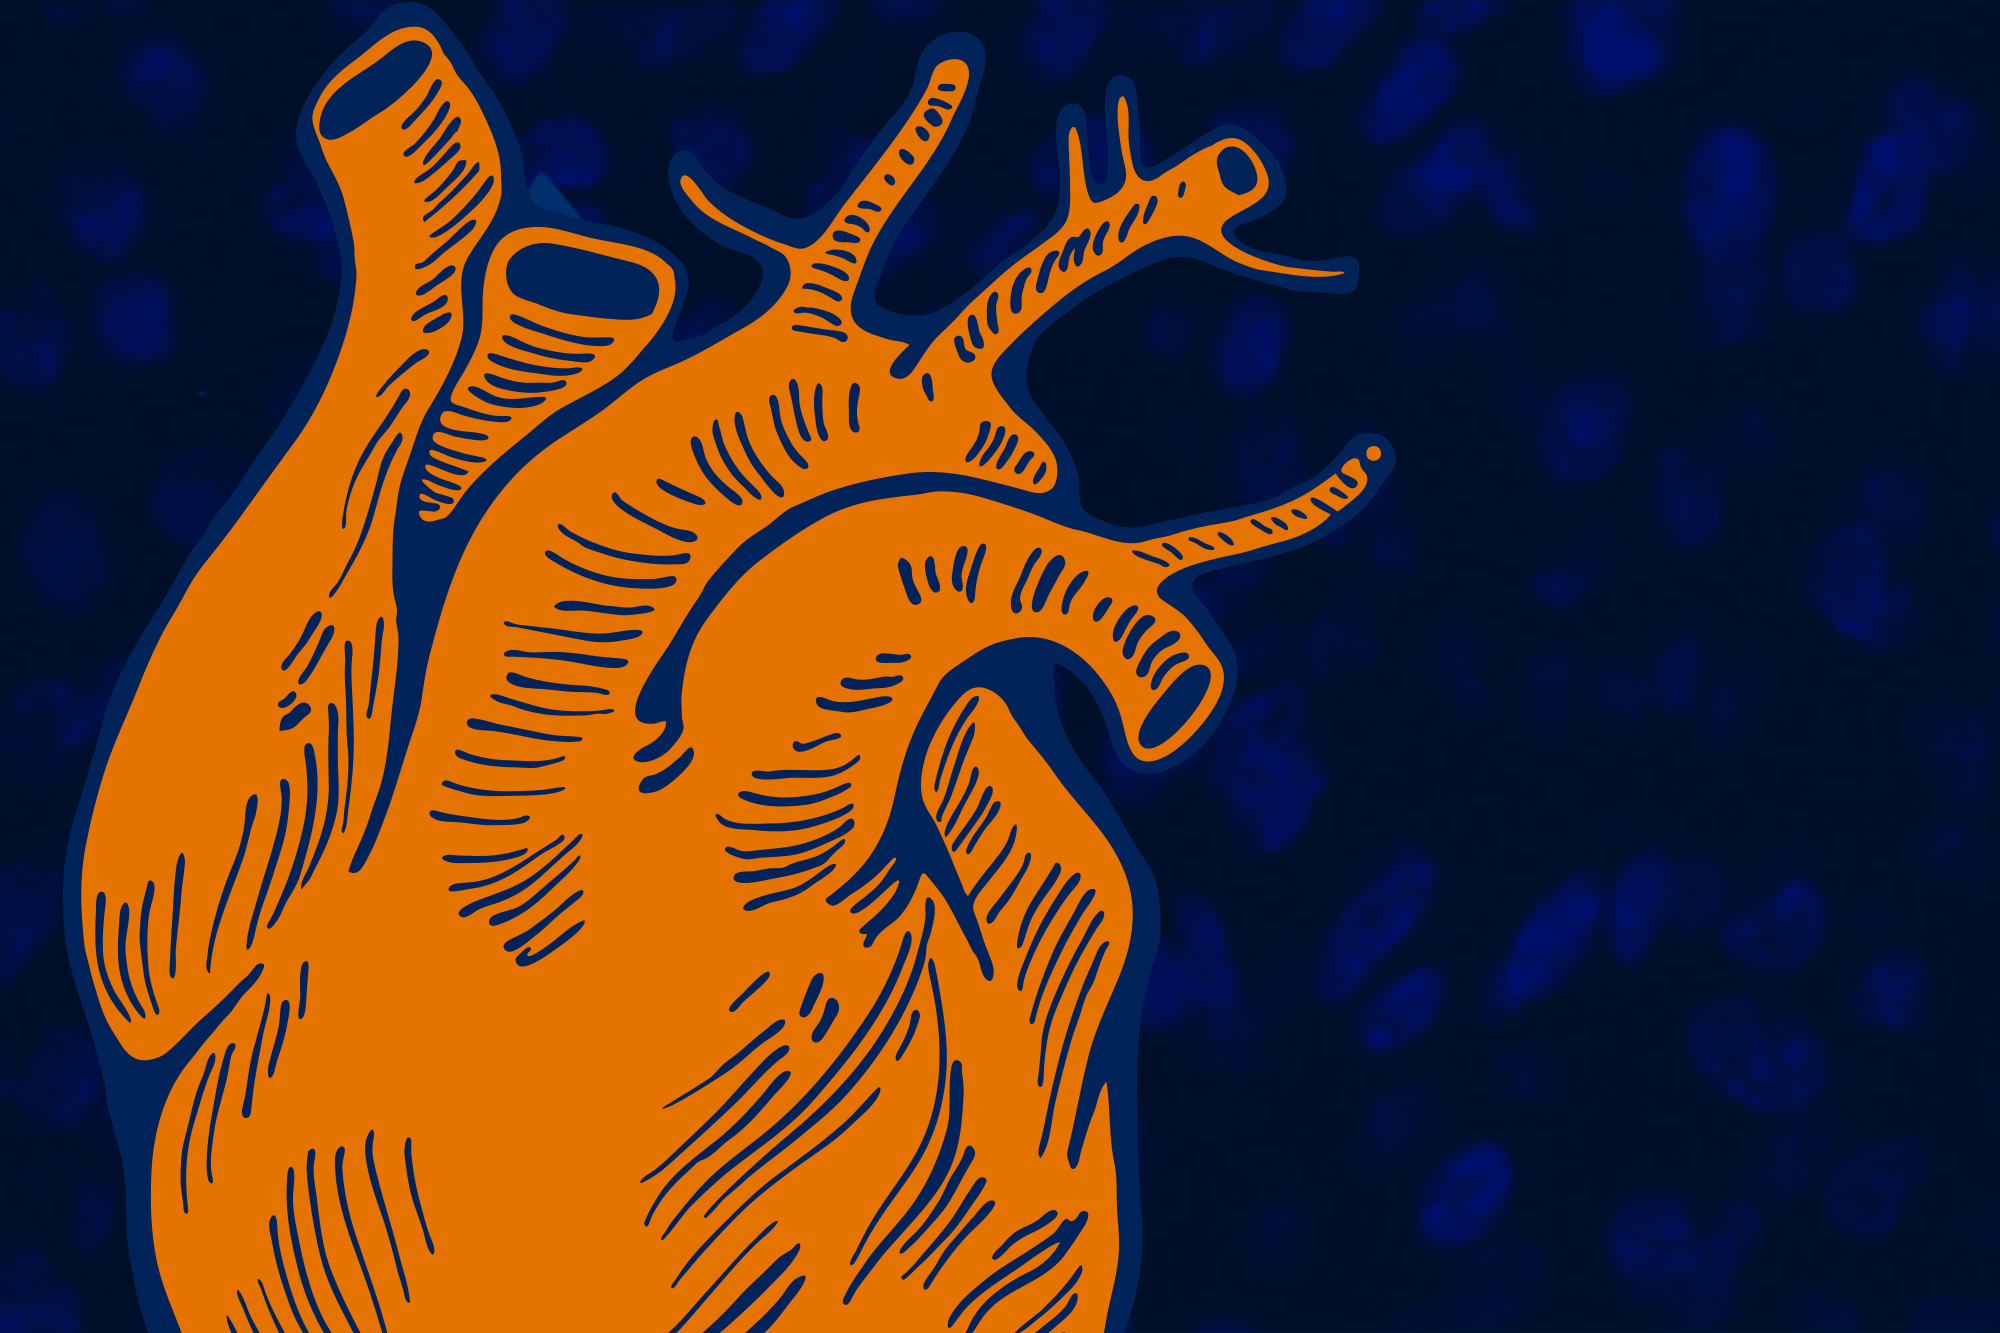 Illustration of a human heart colored orange with a dark blue outline